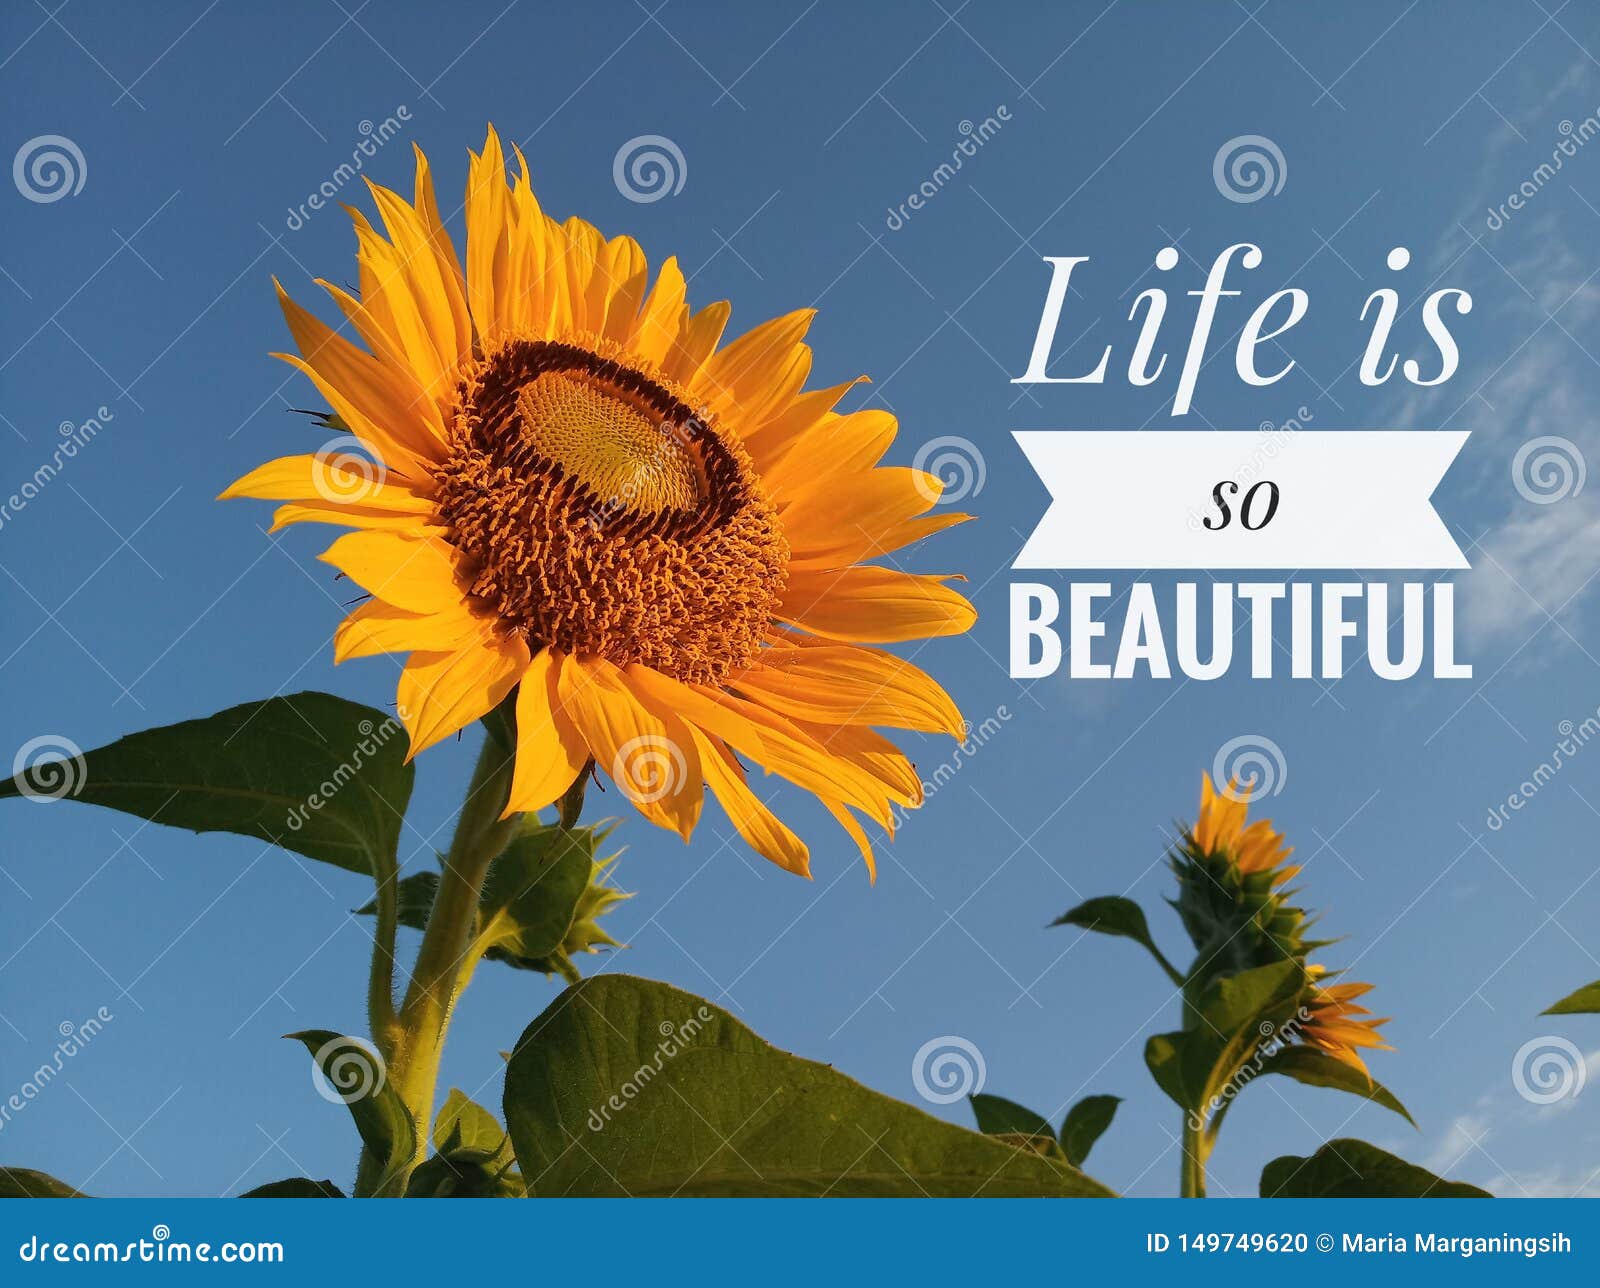 Life Is So Beautiful With Sunflower Blossom Stock Photo Image Of Design Blue